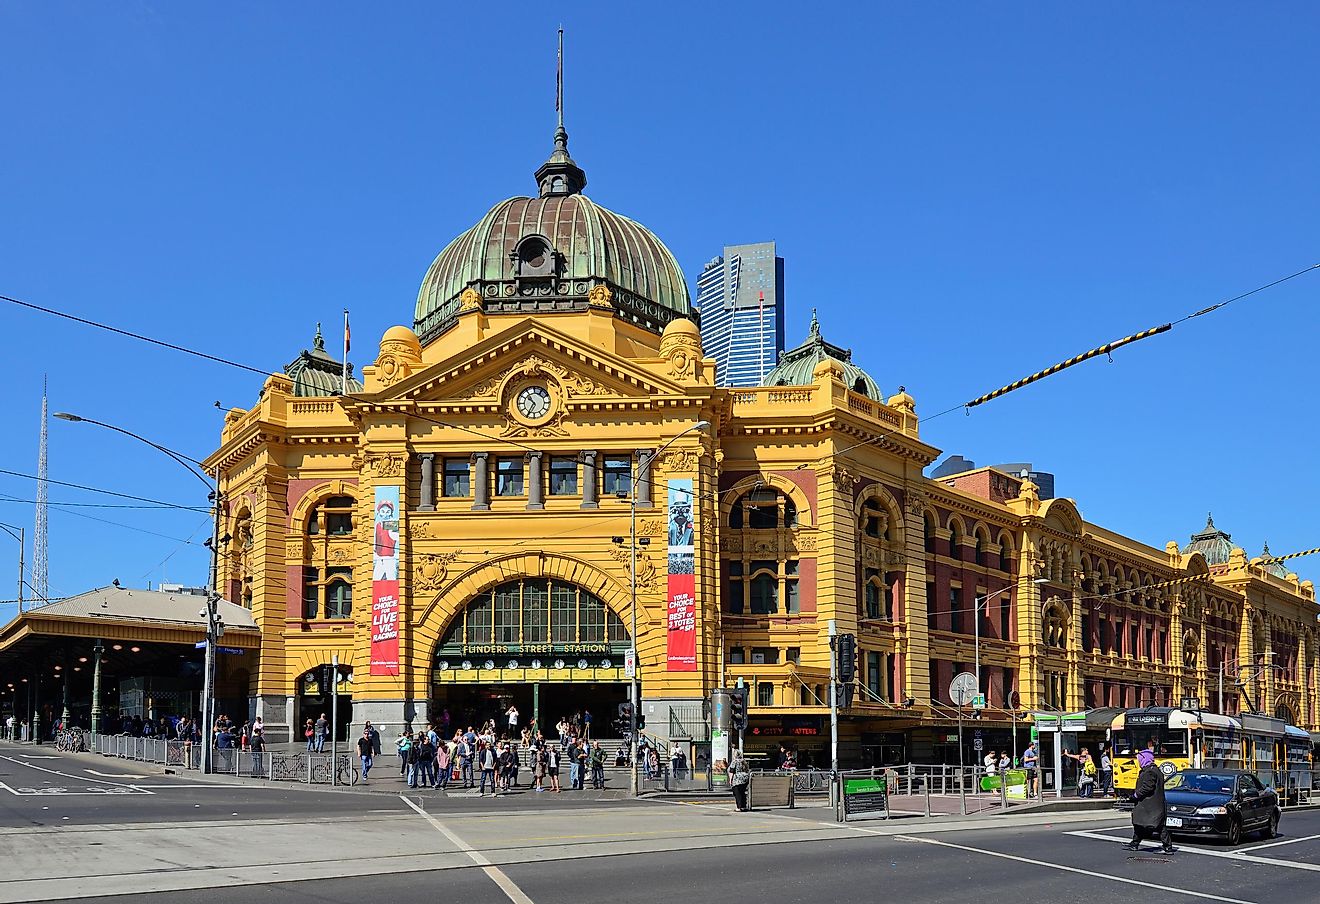 In 1909, this iconic building became the first railway station in Australia. Image credit: Nokuro / Shutterstock.com